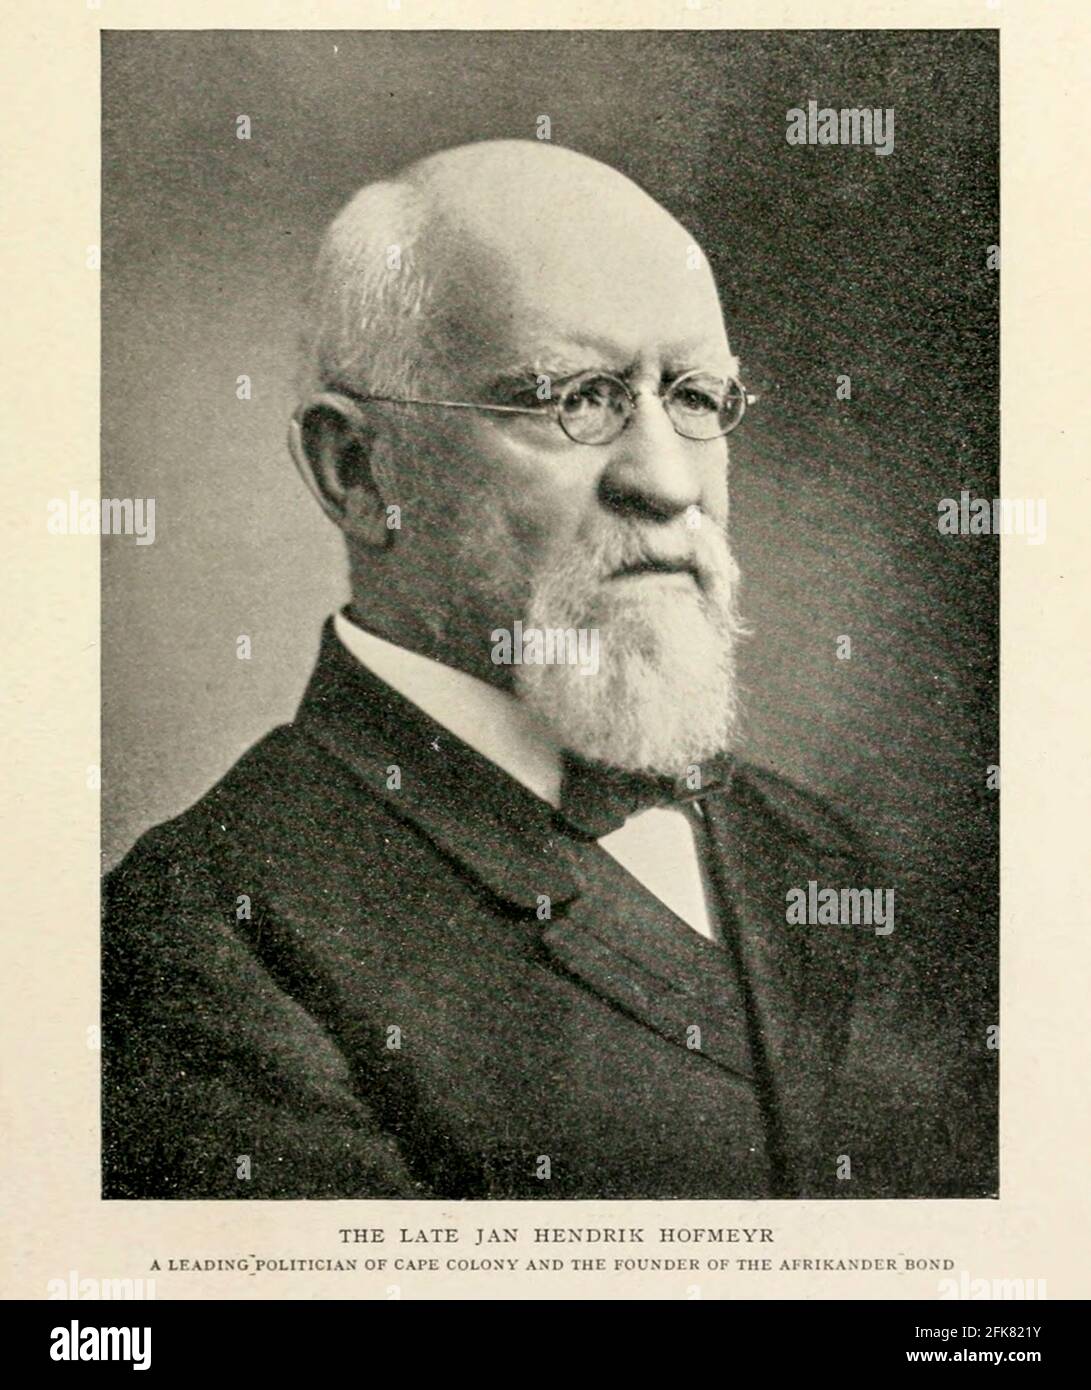 The Late Jan Hendrik Hofmeyr From the Book '  Britain across the seas : Africa : a history and description of the British Empire in Africa ' by Johnston, Harry Hamilton, Sir, 1858-1927 Published in 1910 in London by National Society's Depository Stock Photo